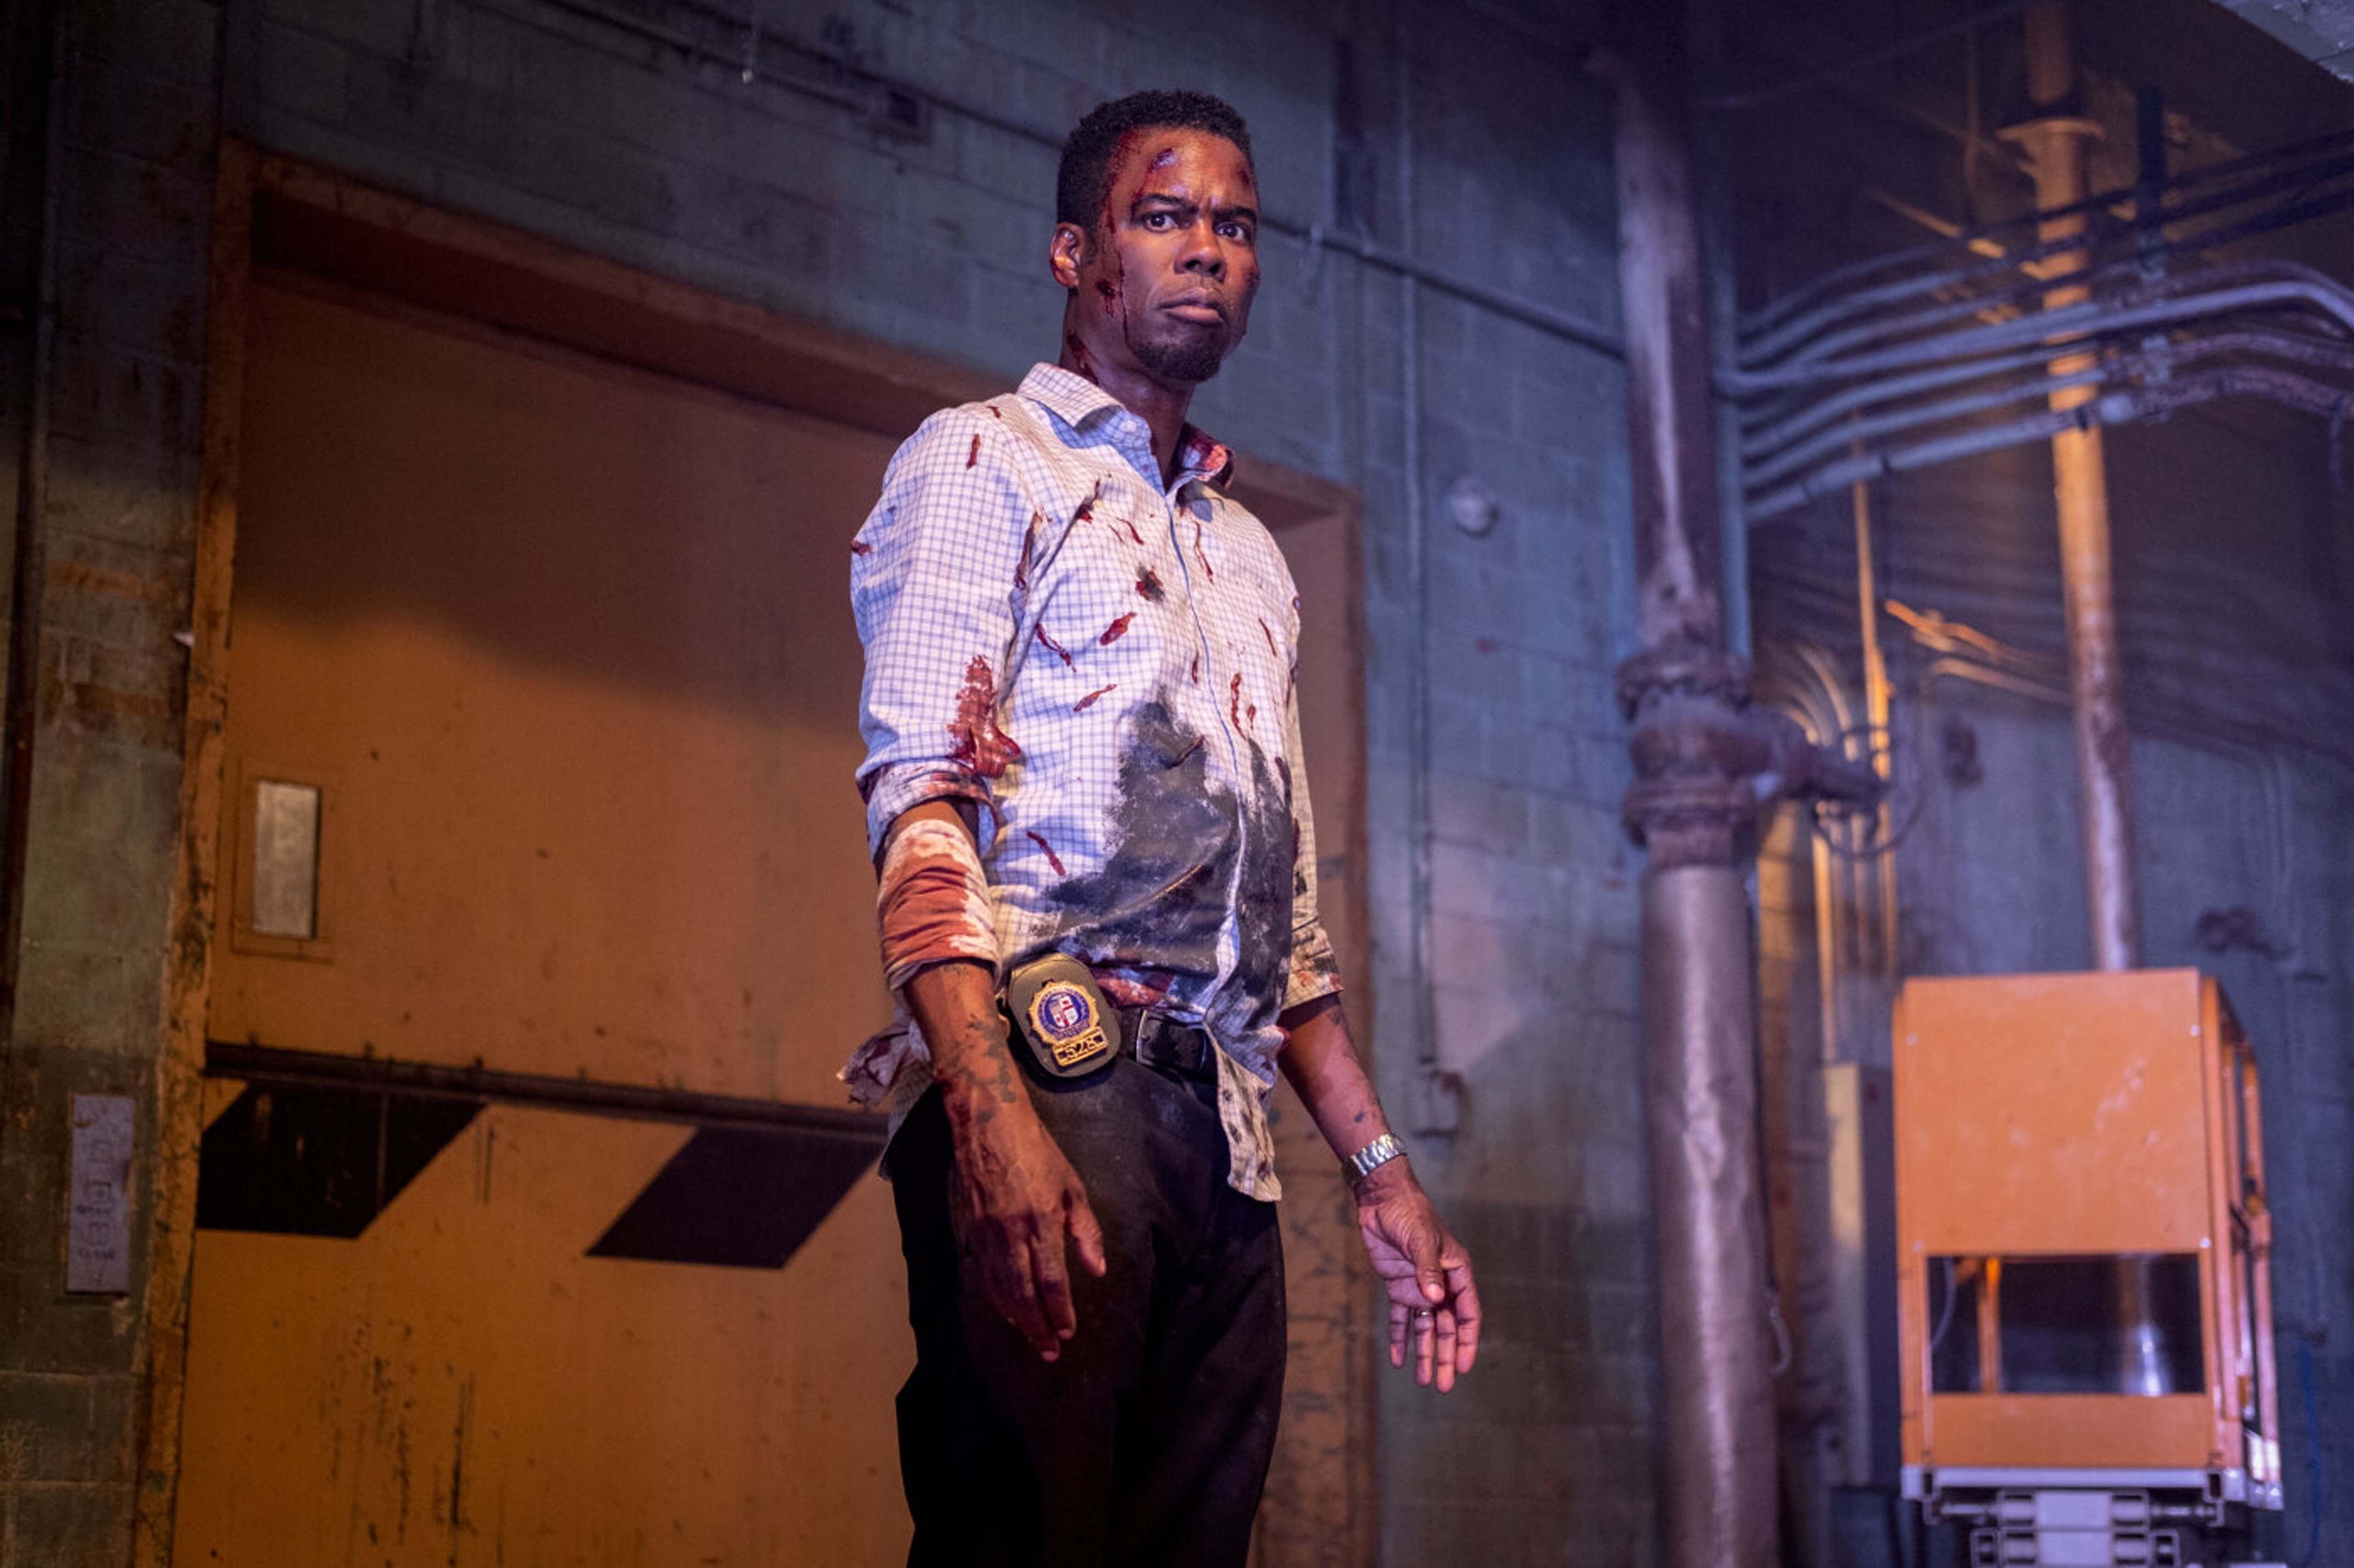 A bloodied Chris Rock stands near a freight elevator